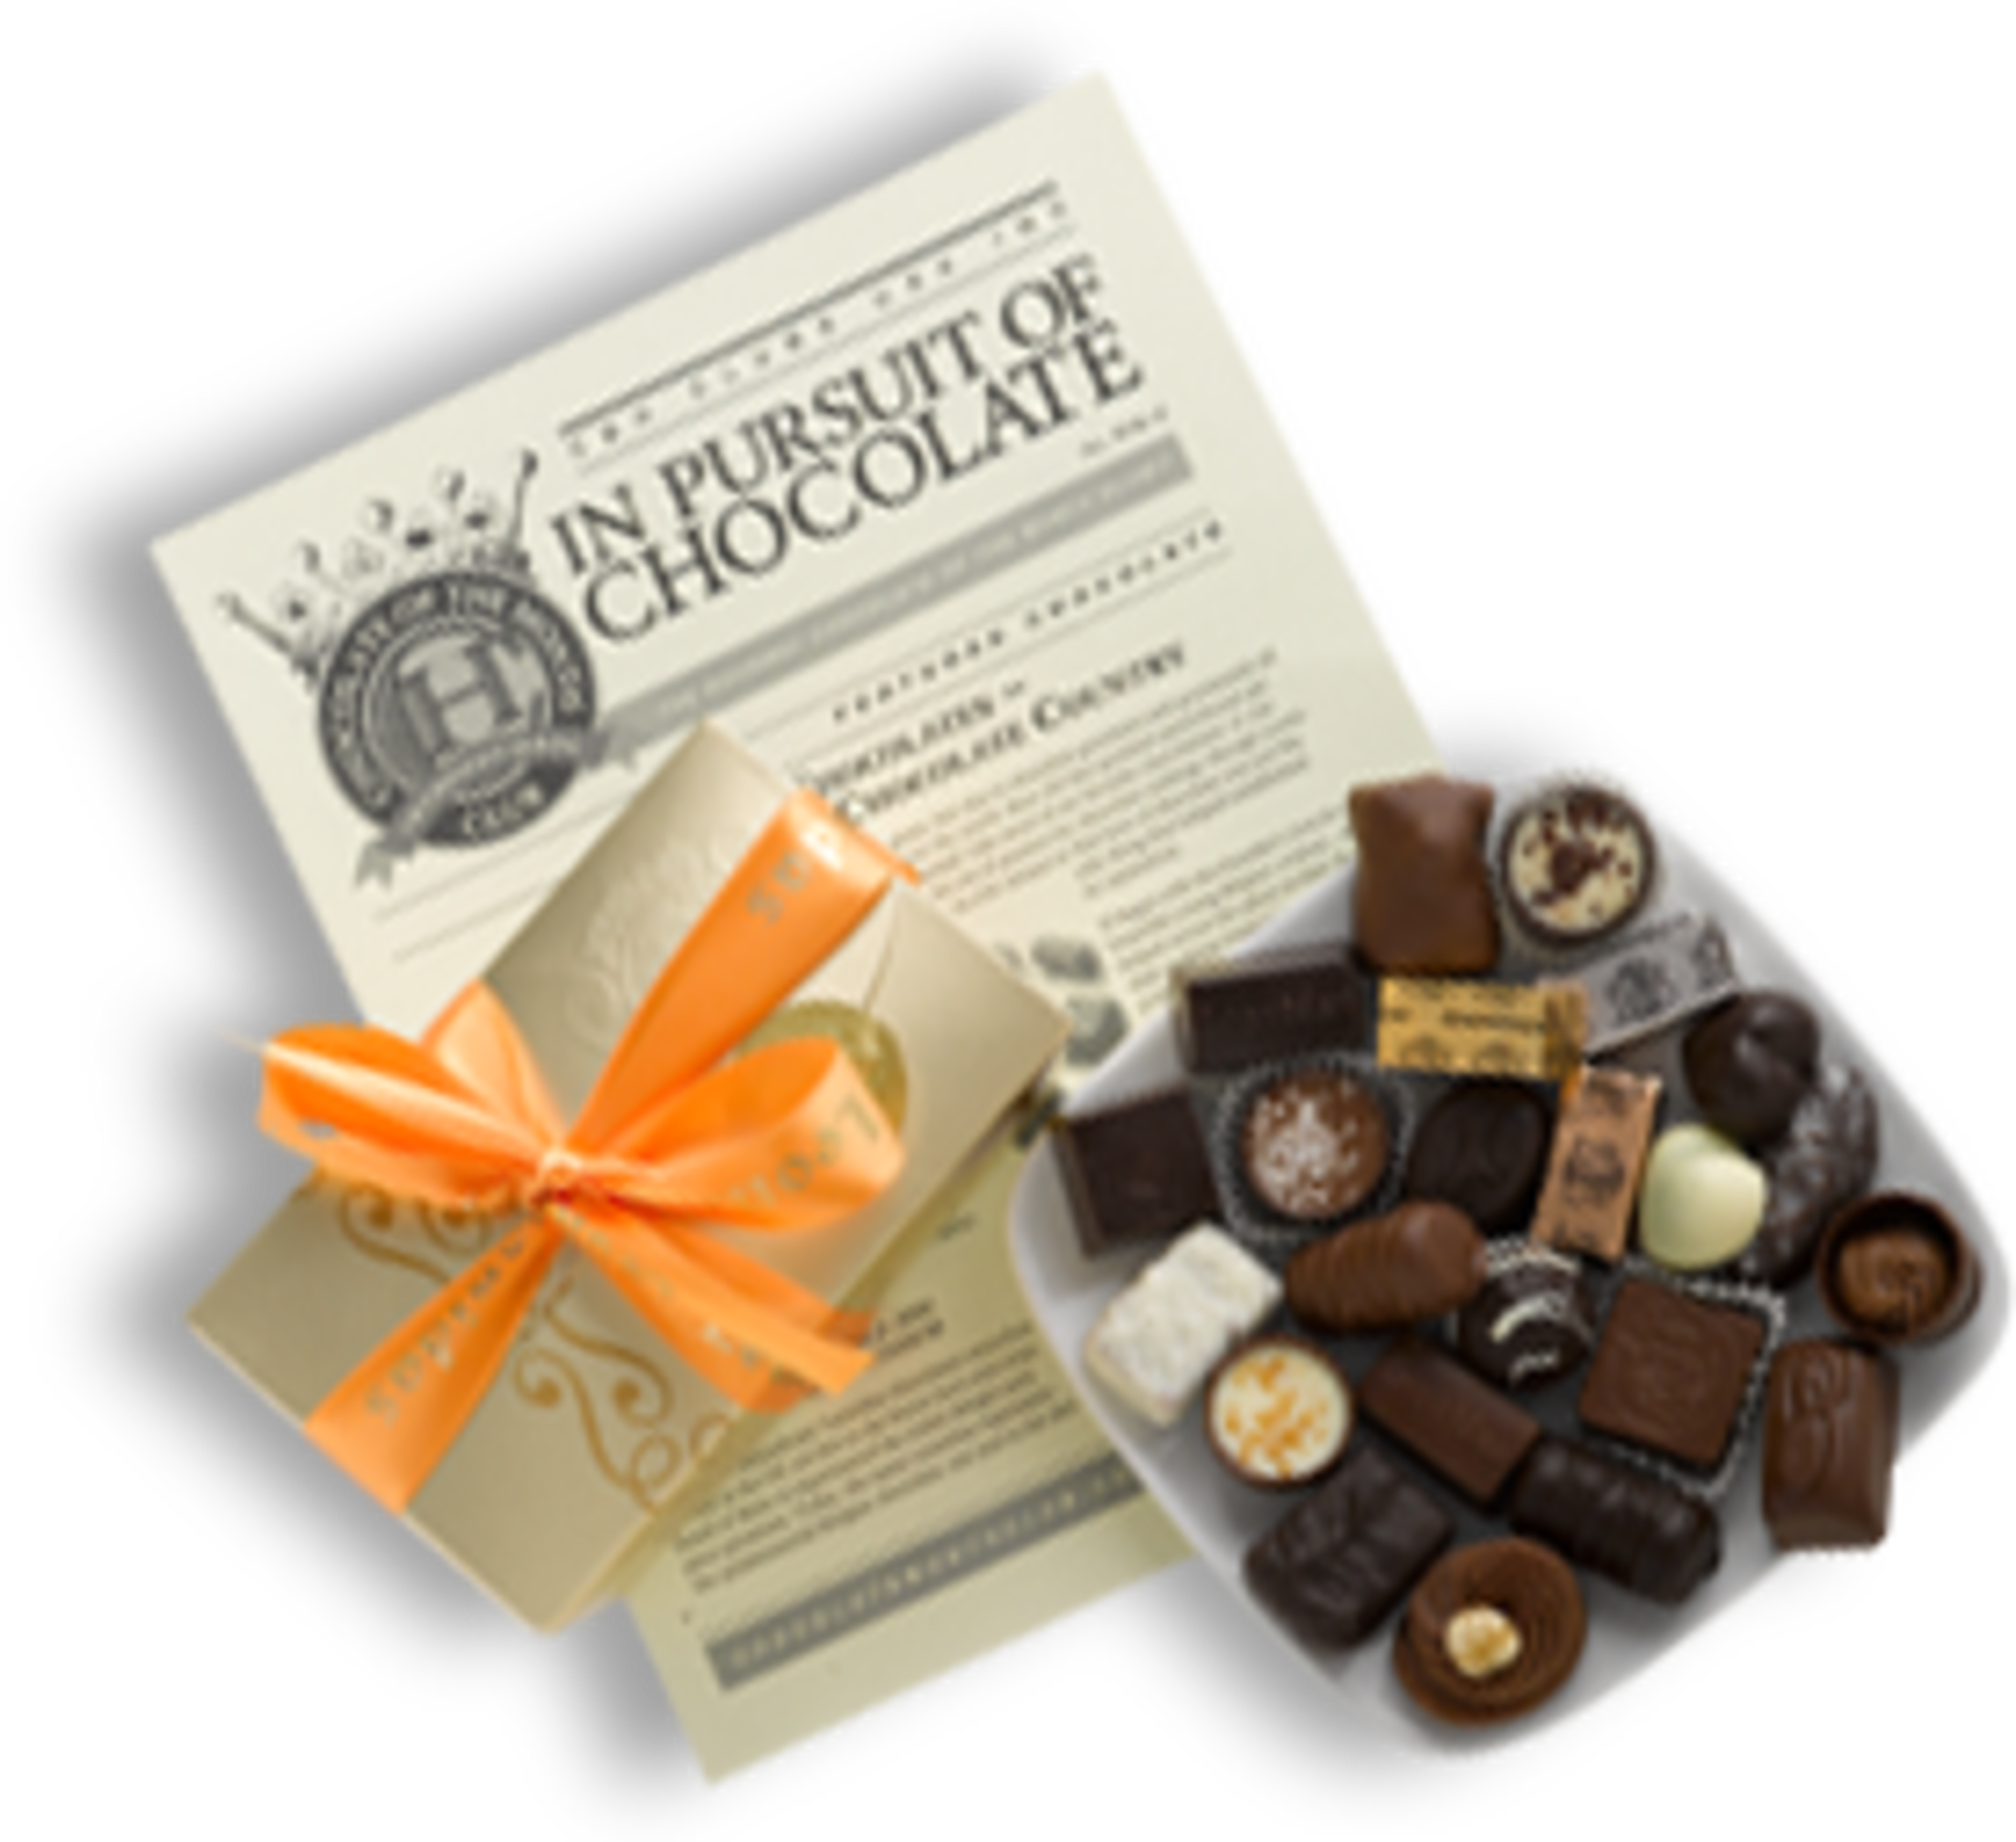 Chocolate of the Month Club Code